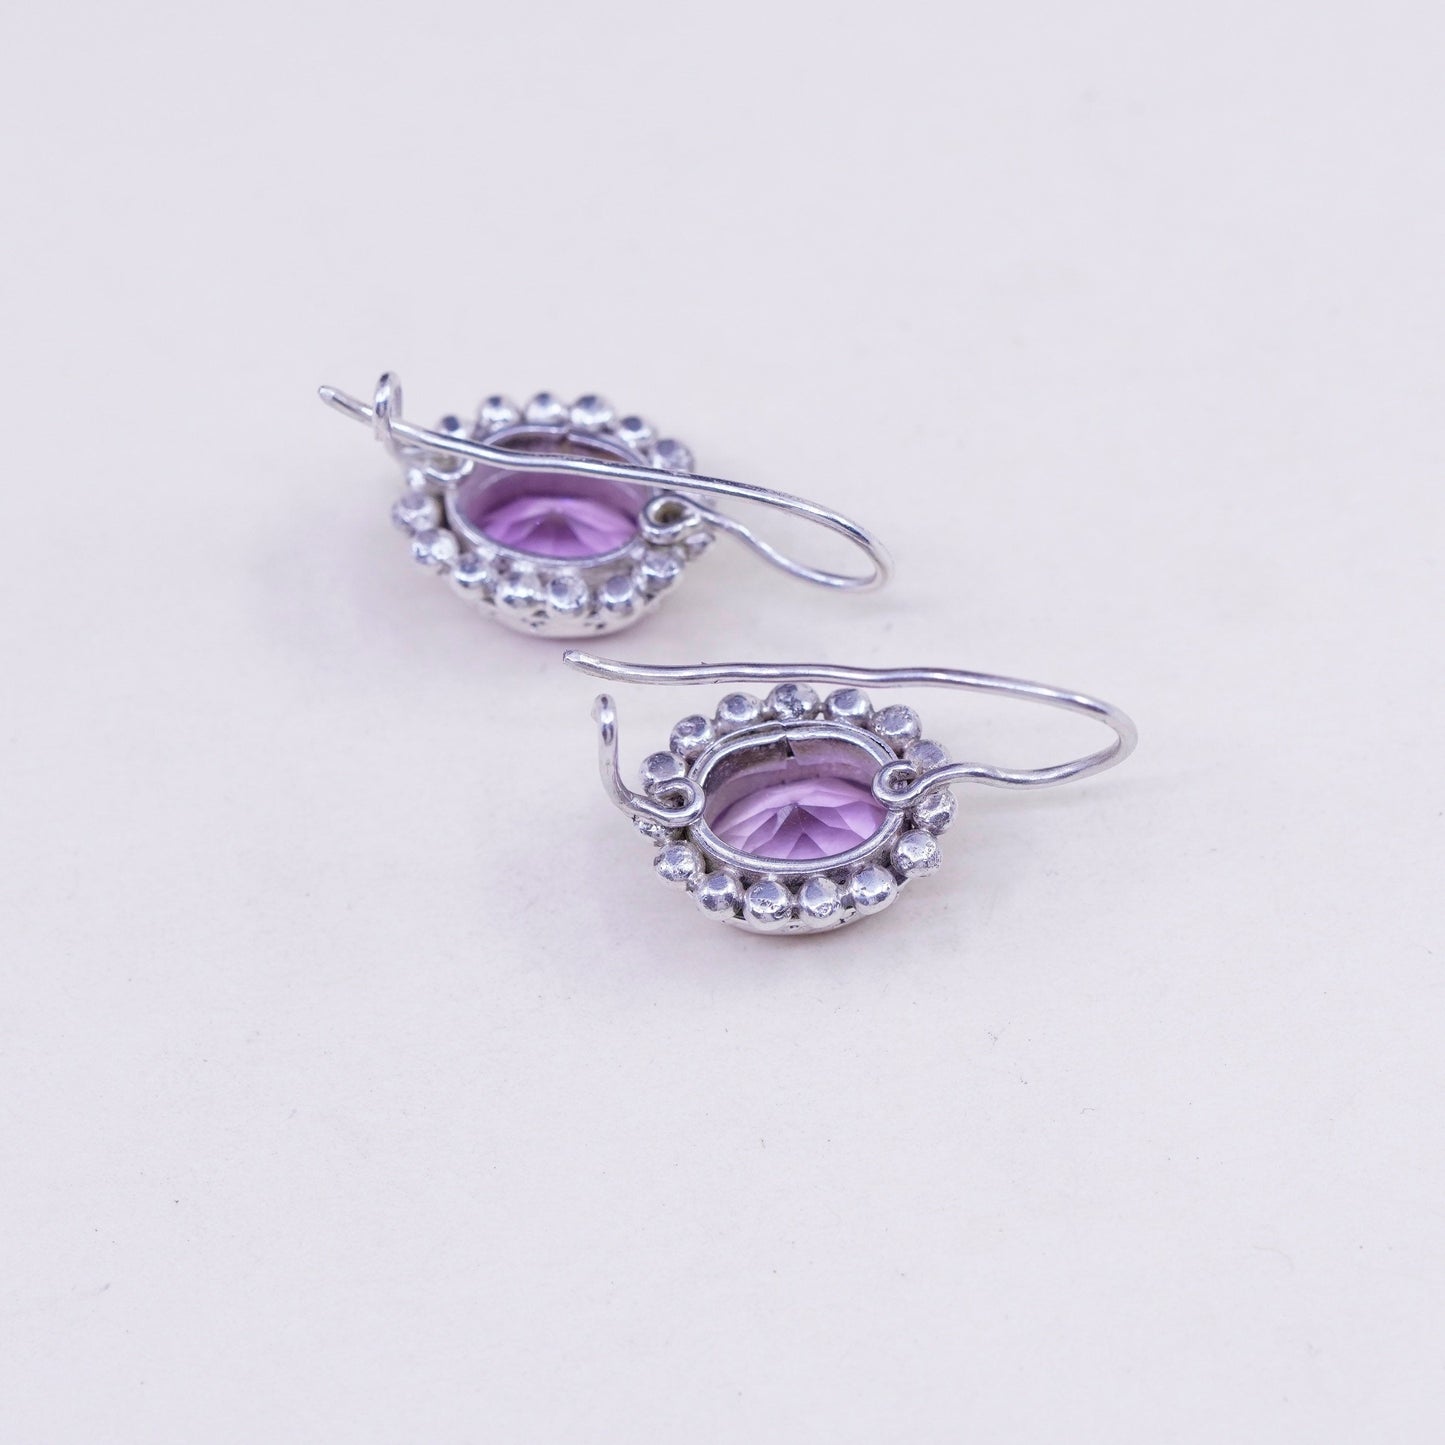 Vintage sterling silver handmade earrings, 925 drops with amethyst and beads